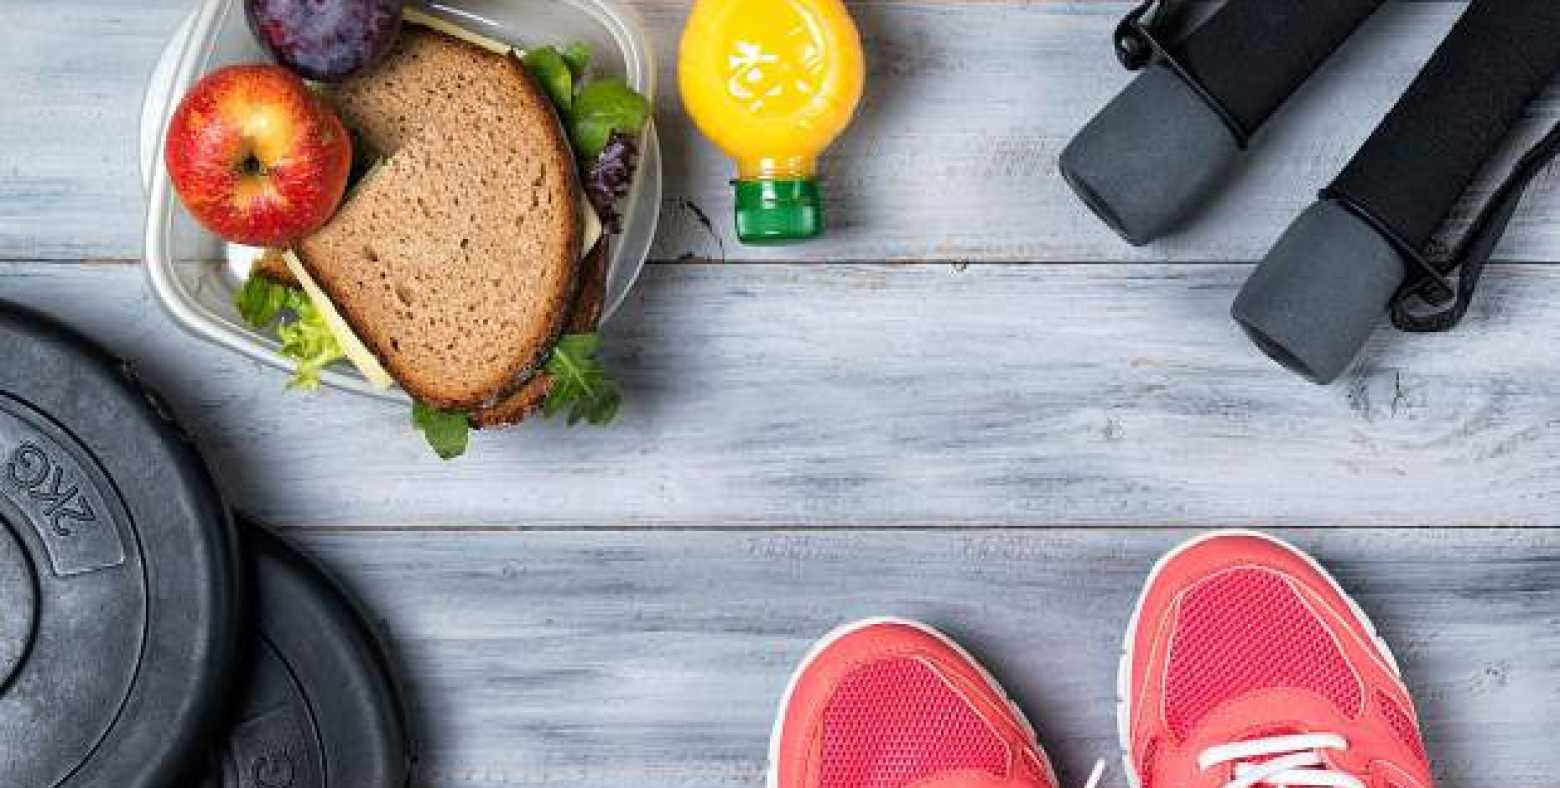 Sneakers, healthy snacks, and workout equipment